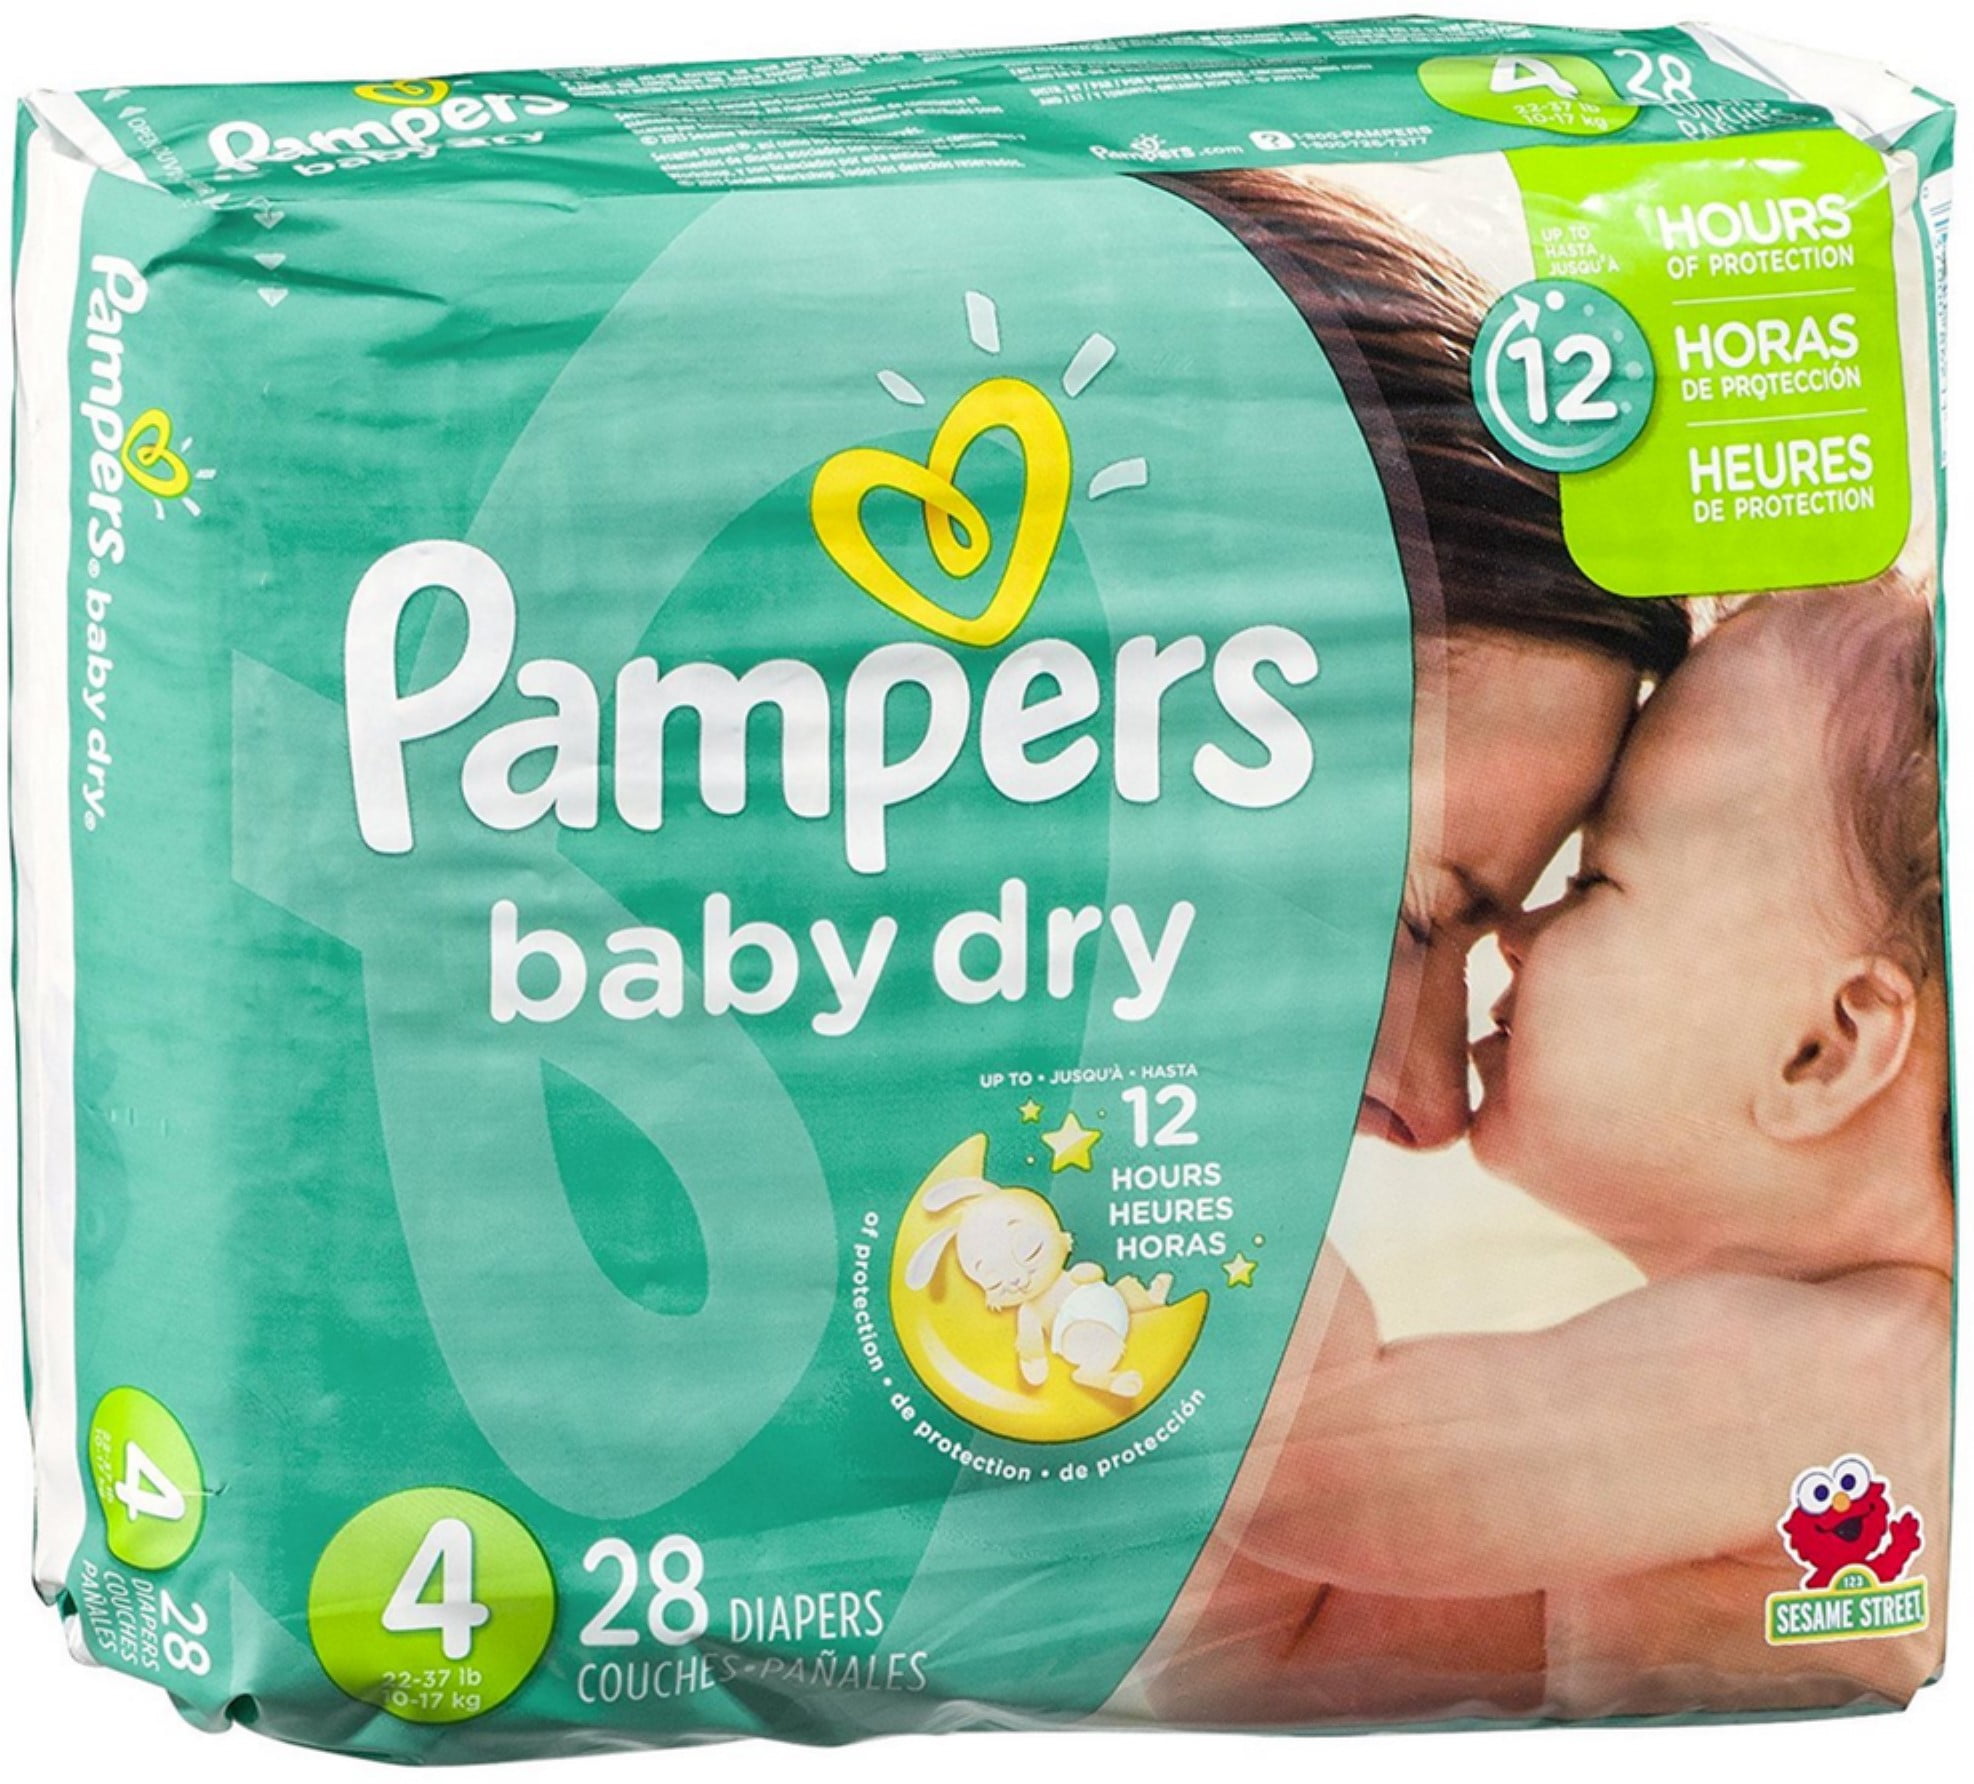 Pampers baby dry couches 4kg - 8kg taille 2 x124